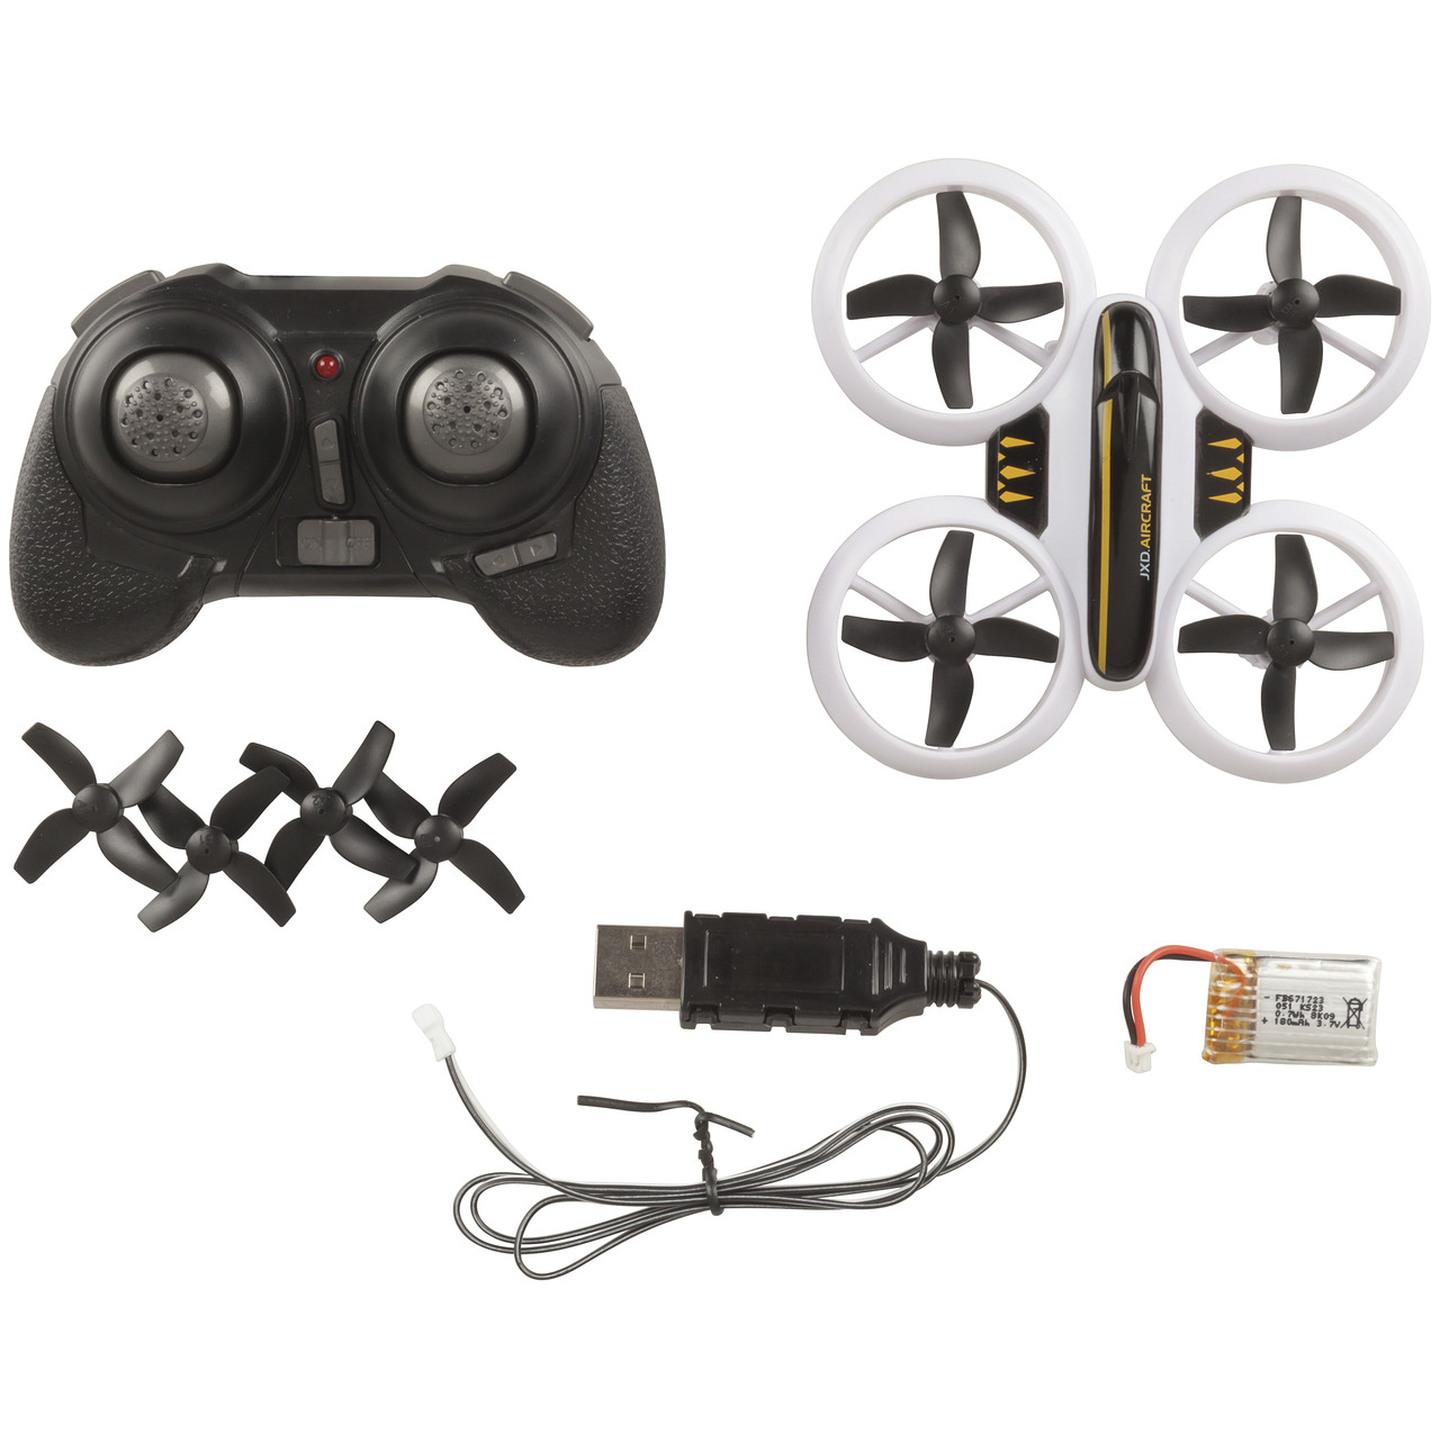 Mini R/C Quadcopter with LEDs